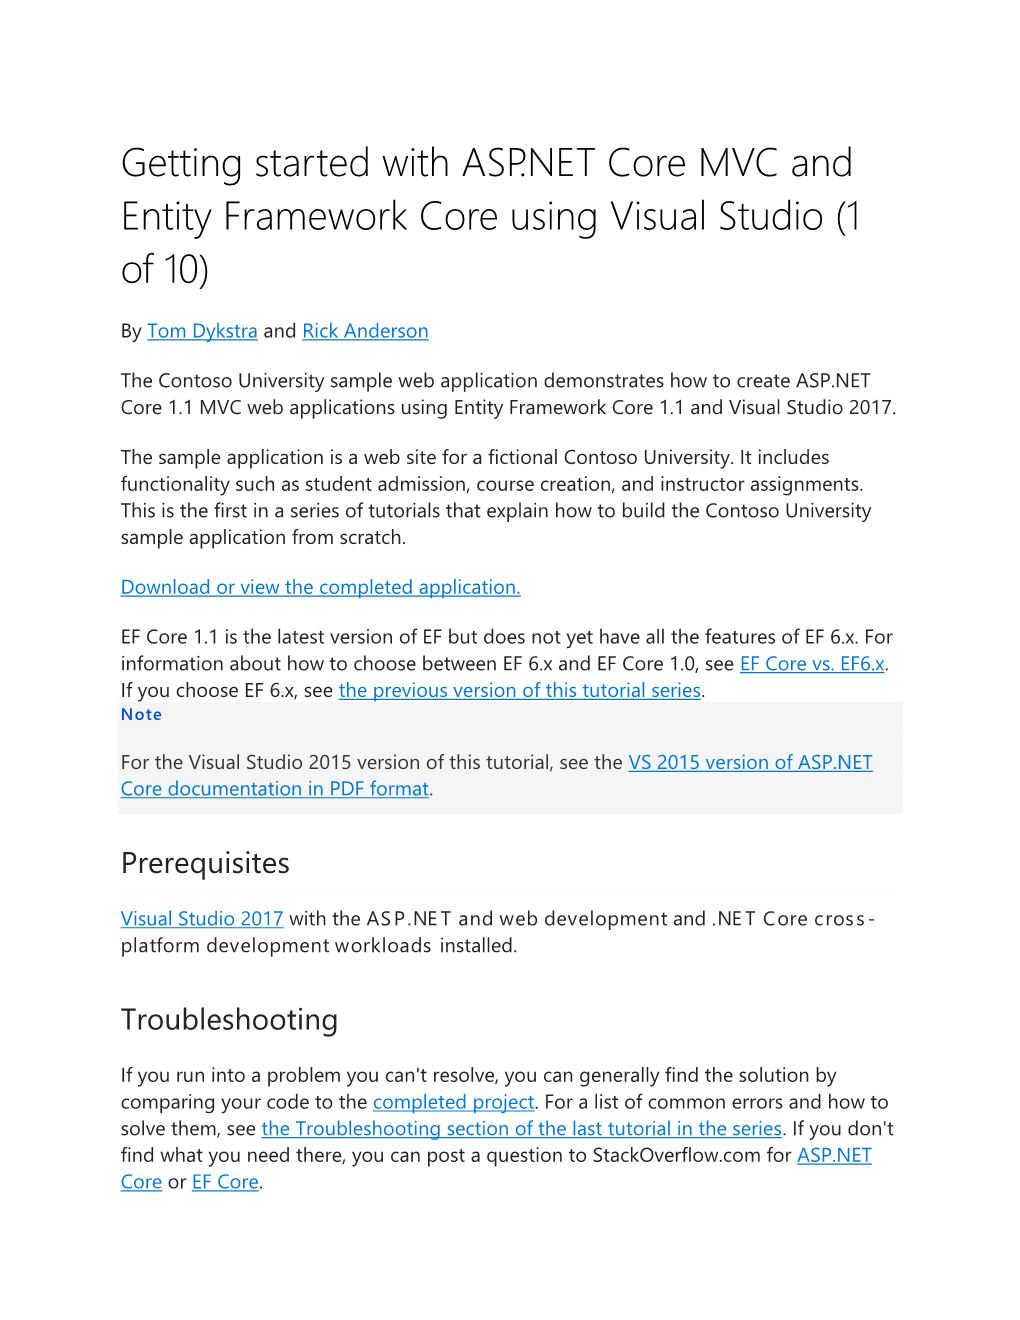 Getting Started with ASP.NET Core MVC and Entity Framework Core Using Visual Studio (1 of 10)